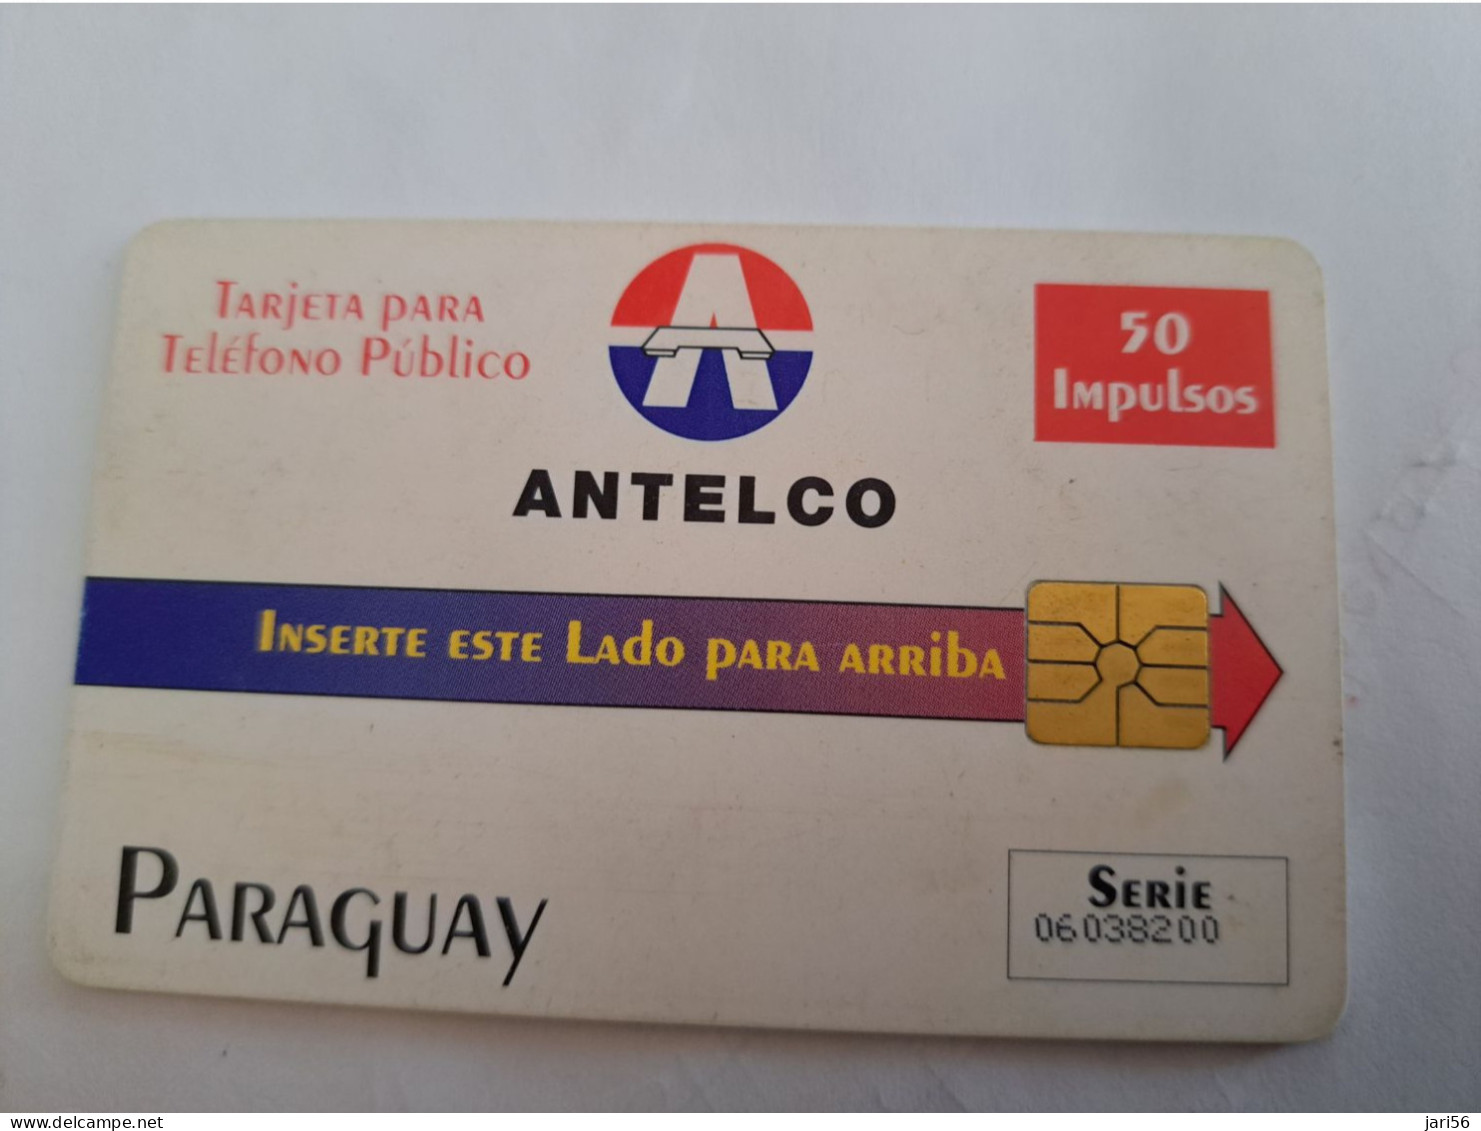 PARAGUAY  50 IMPULSOS RED / INSTRUCTIONS DE USO    Fine Used Card  ** 14229** - Paraguay